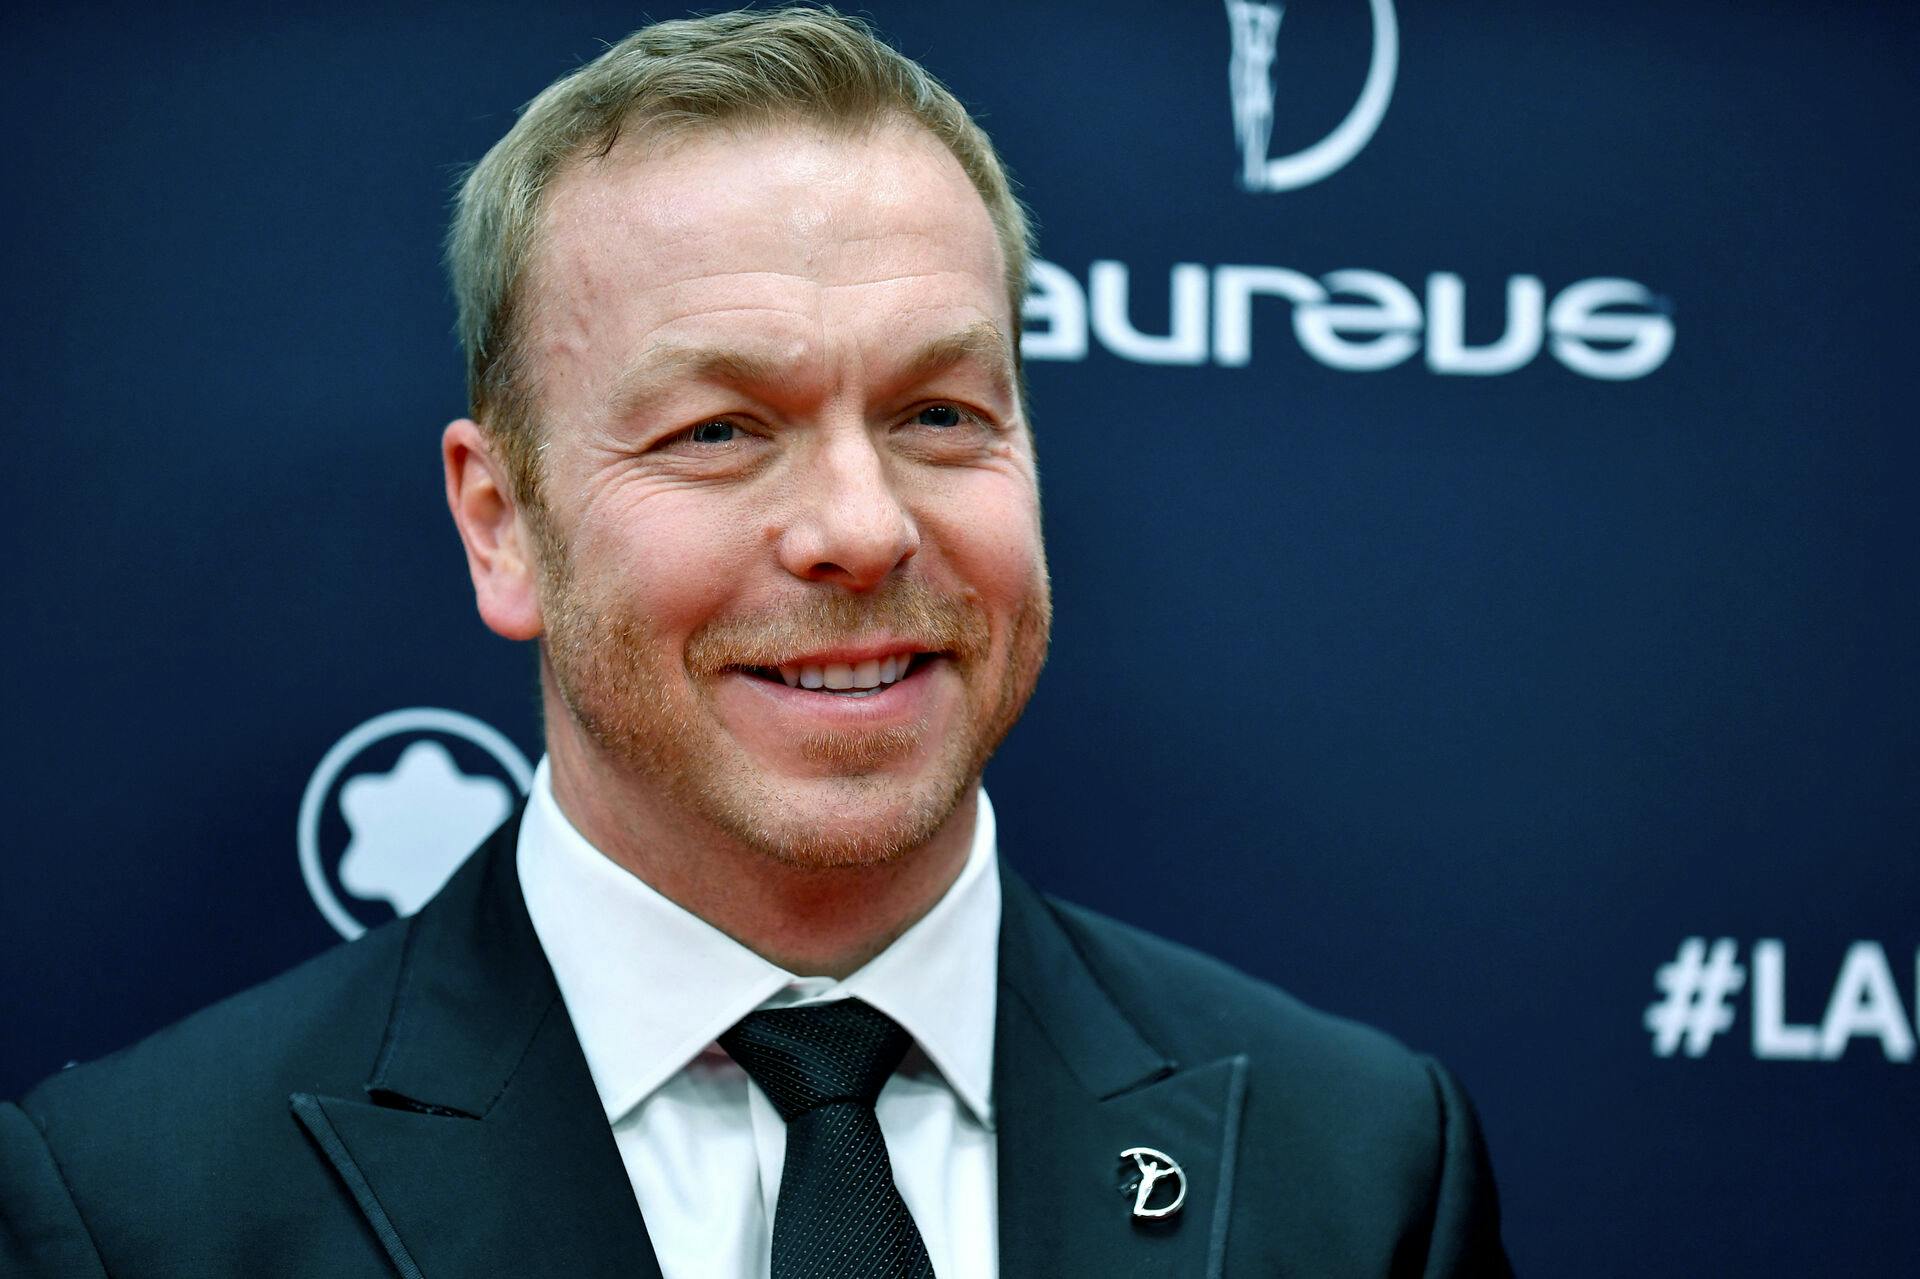 Former Scottish cyclist Chris Hoy poses on the red carpet prior to the 2023 Laureus World Sports Awards ceremony in Paris on May 8, 2023. JULIEN DE ROSA / AFP